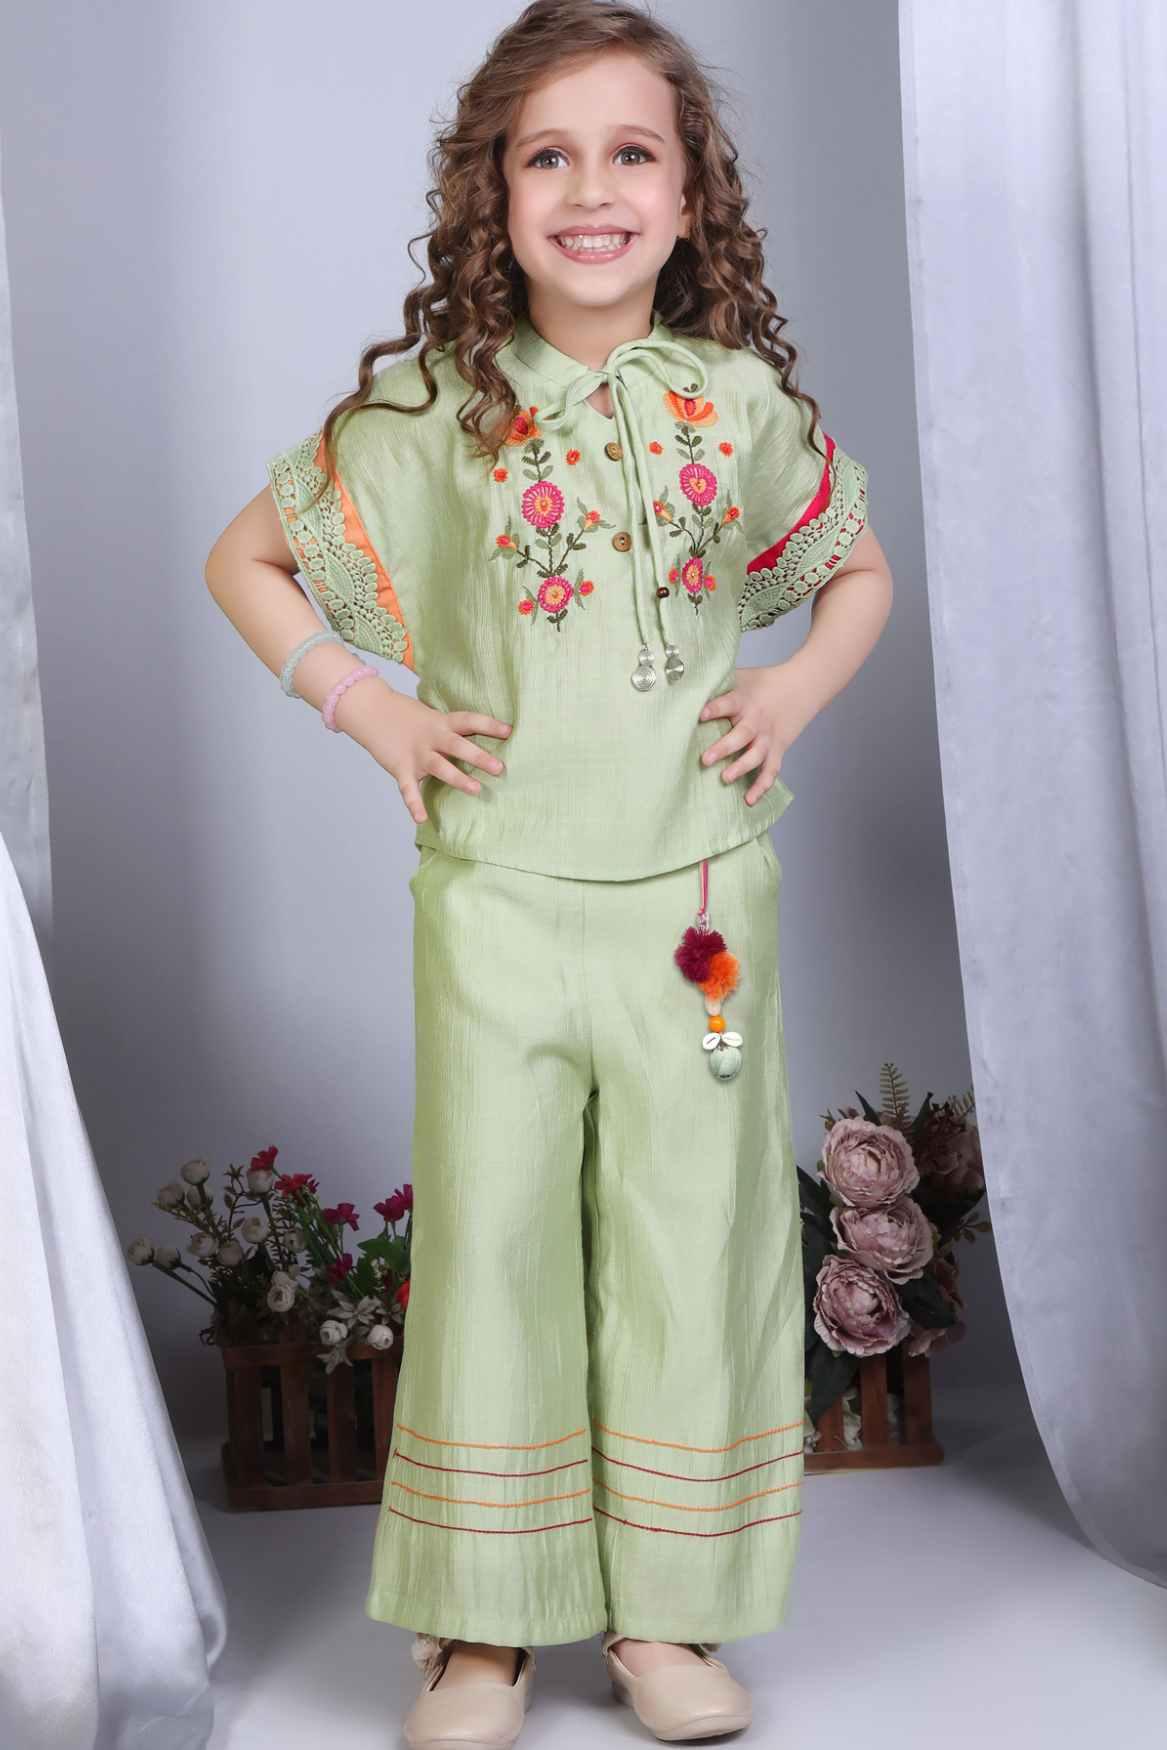 Green Co-Ord Set With Floral Embroidery For Girls - Lagorii Kids